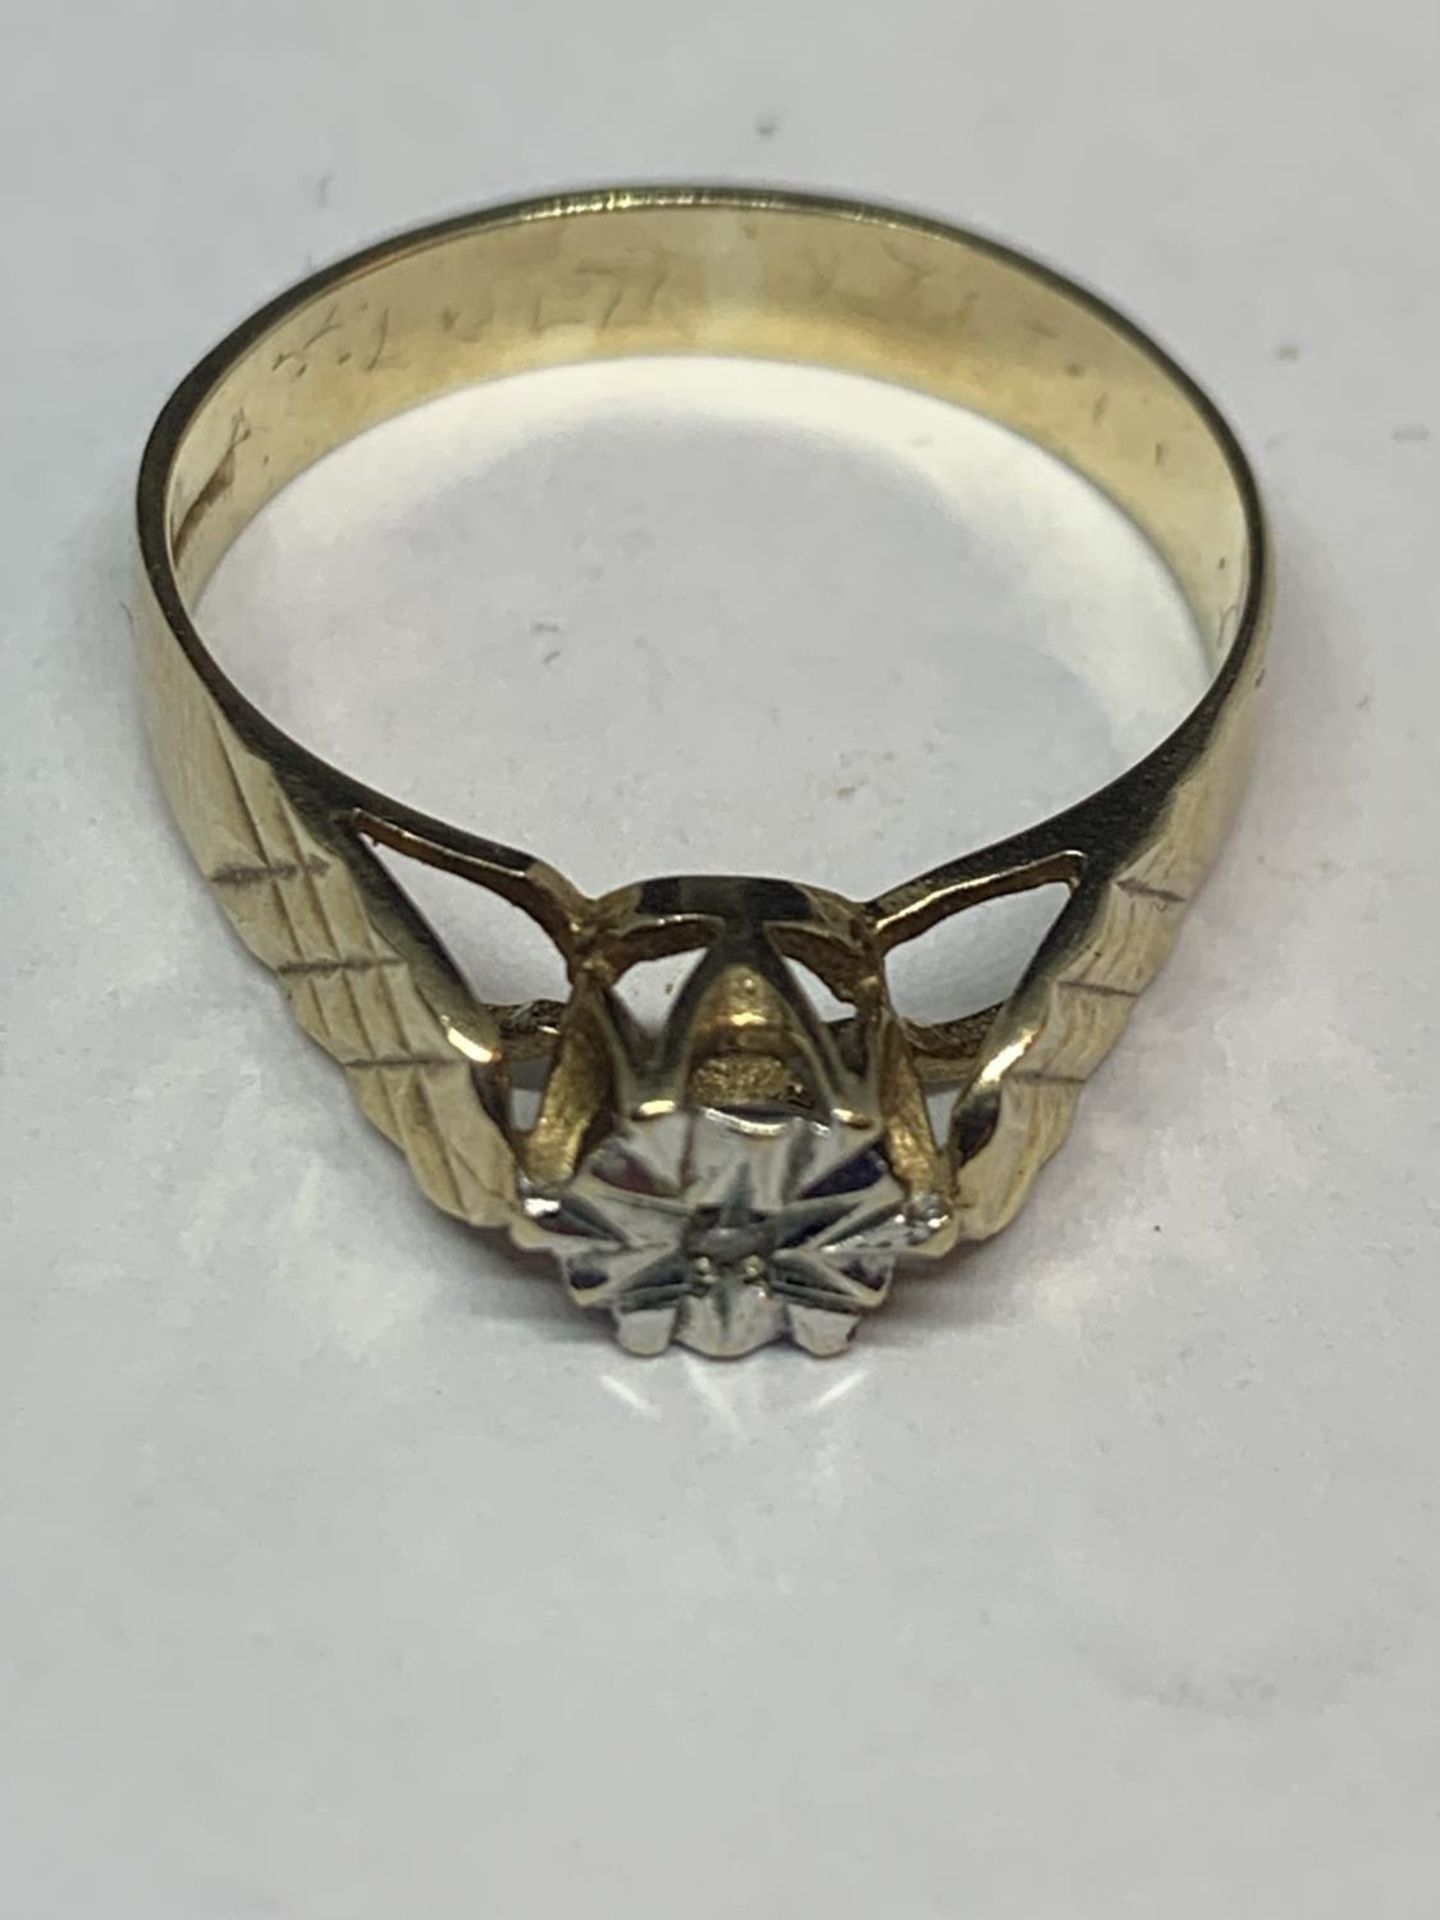 A 9 CARAT GOLD DIAMOND CHIP RING WITH DECORATIVE SHOULDERS SIZE L/M